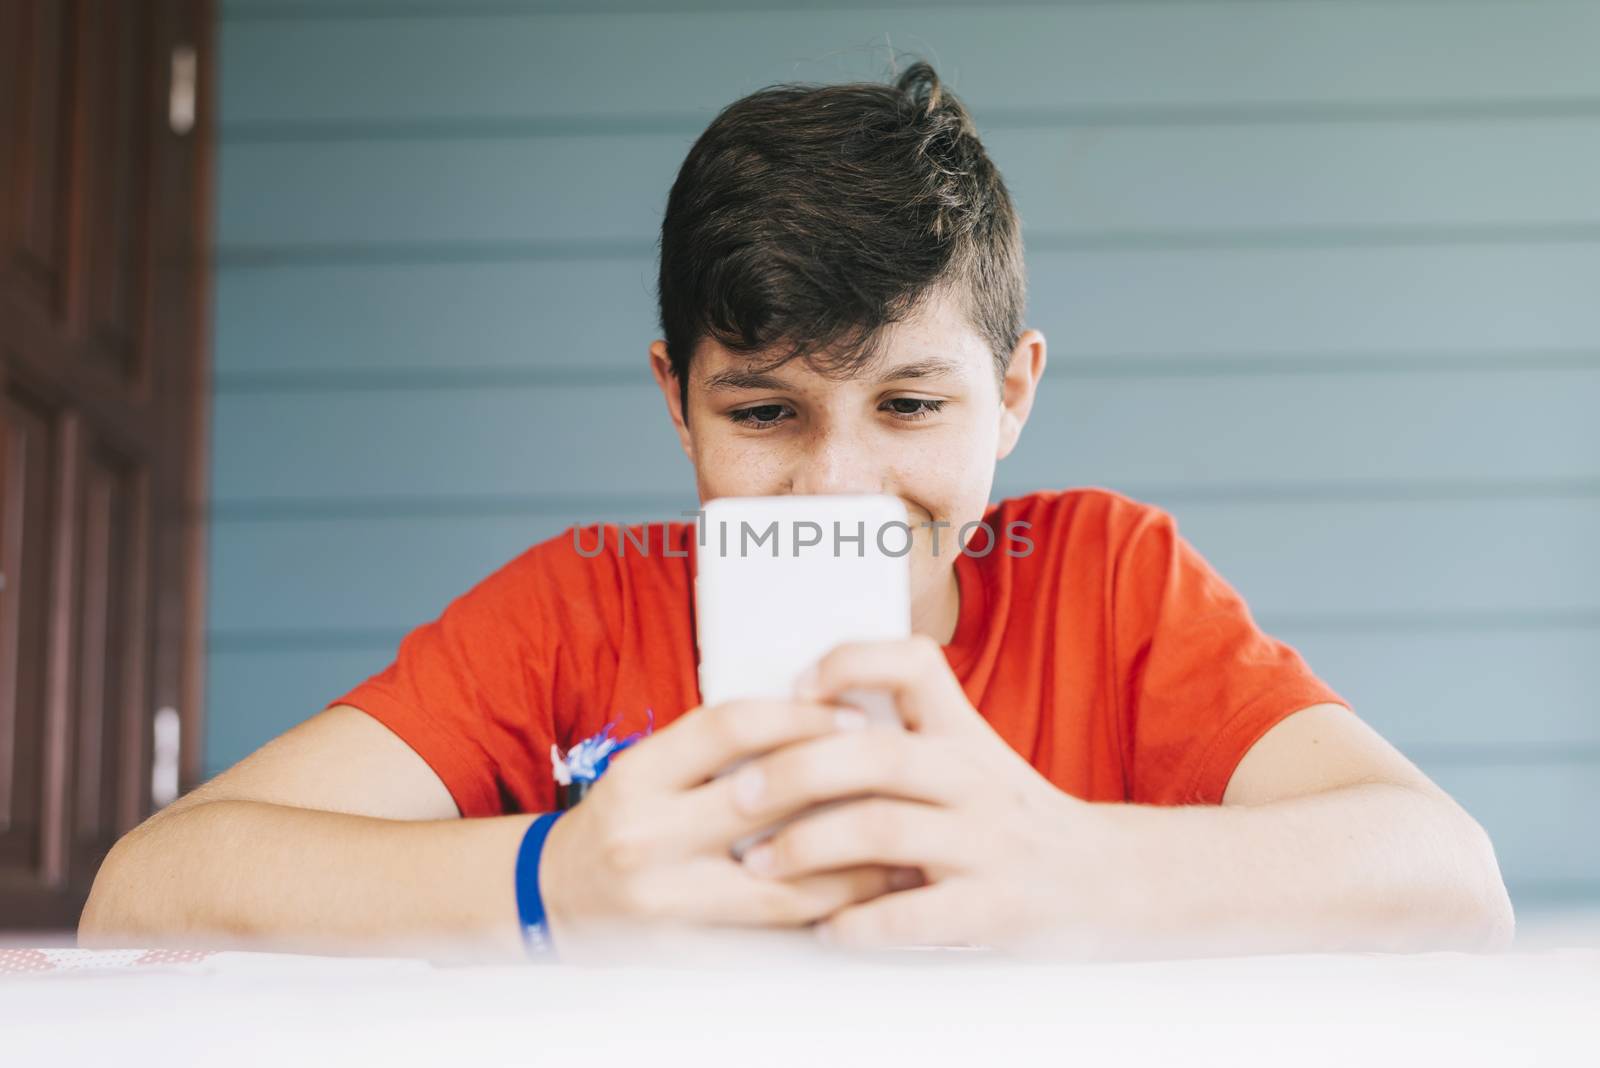 Handsome Caucasian 13-year old boy wearing red t-shirt sitting outdoors using electronic gadget by raferto1973